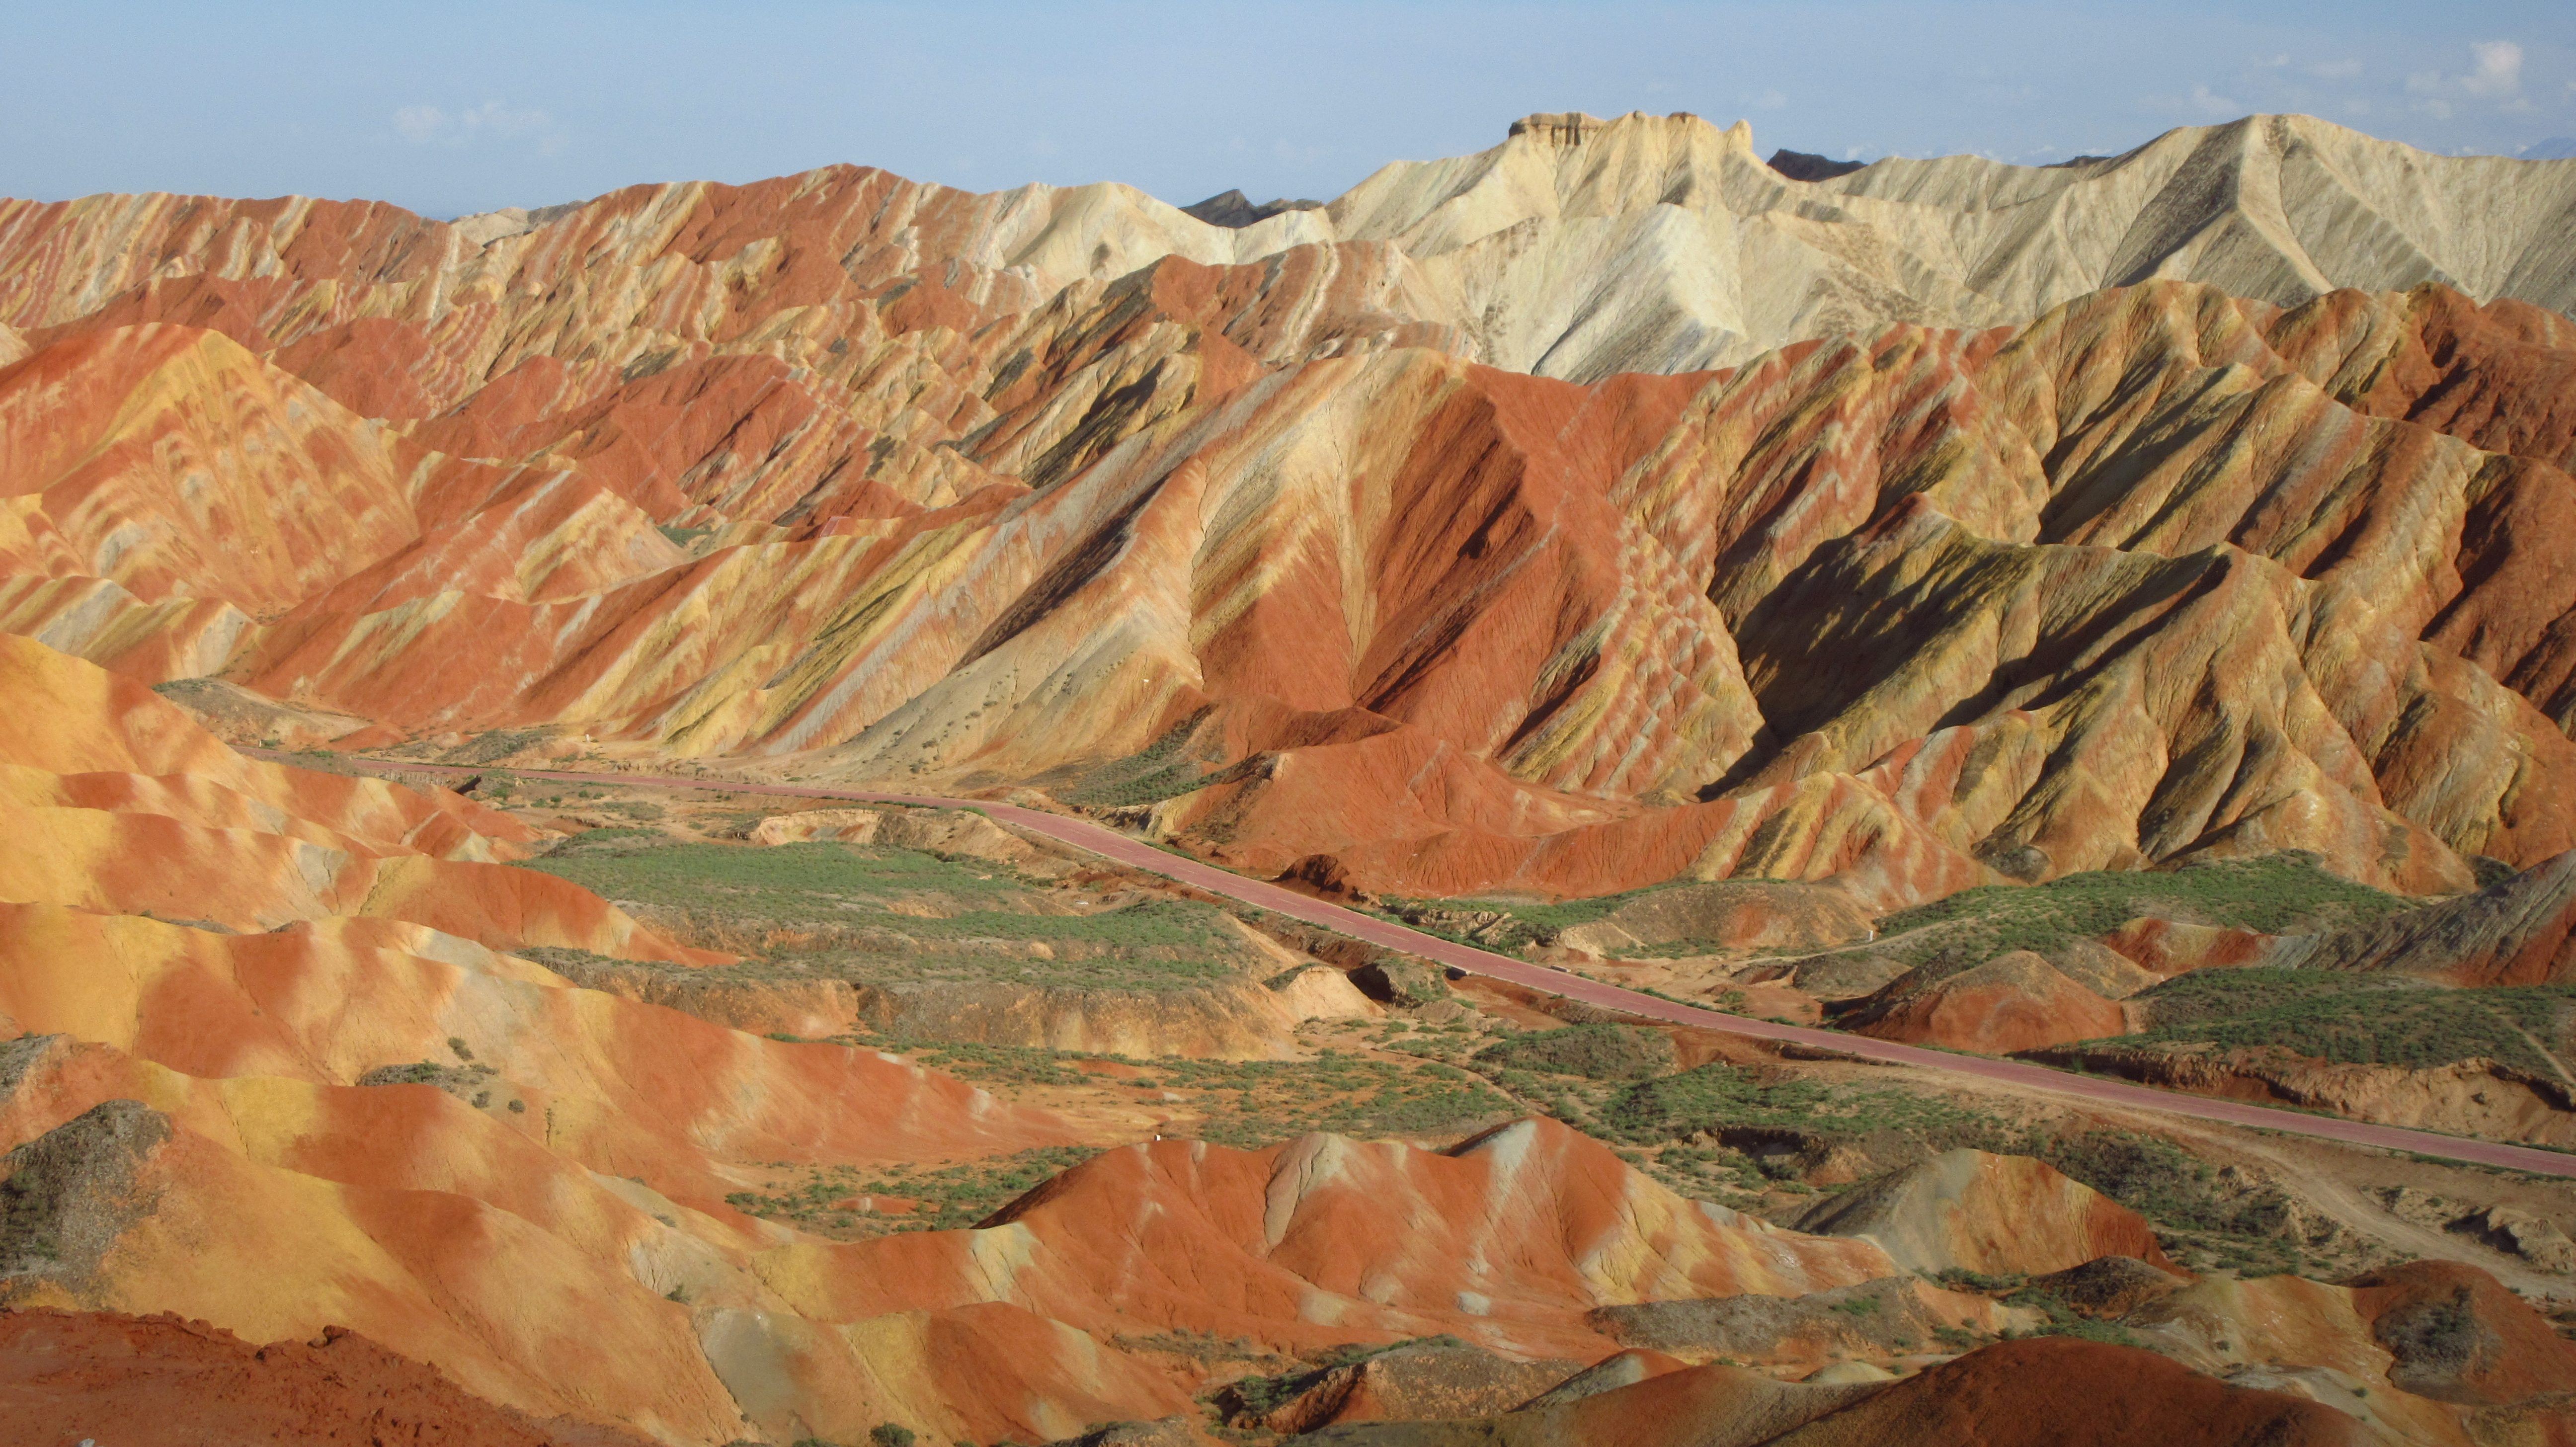 EXPLOSION OF COLORS. You'll see a mix of yellows, reds and whites in varying shades during your trip to the Rainbow Mountains. 